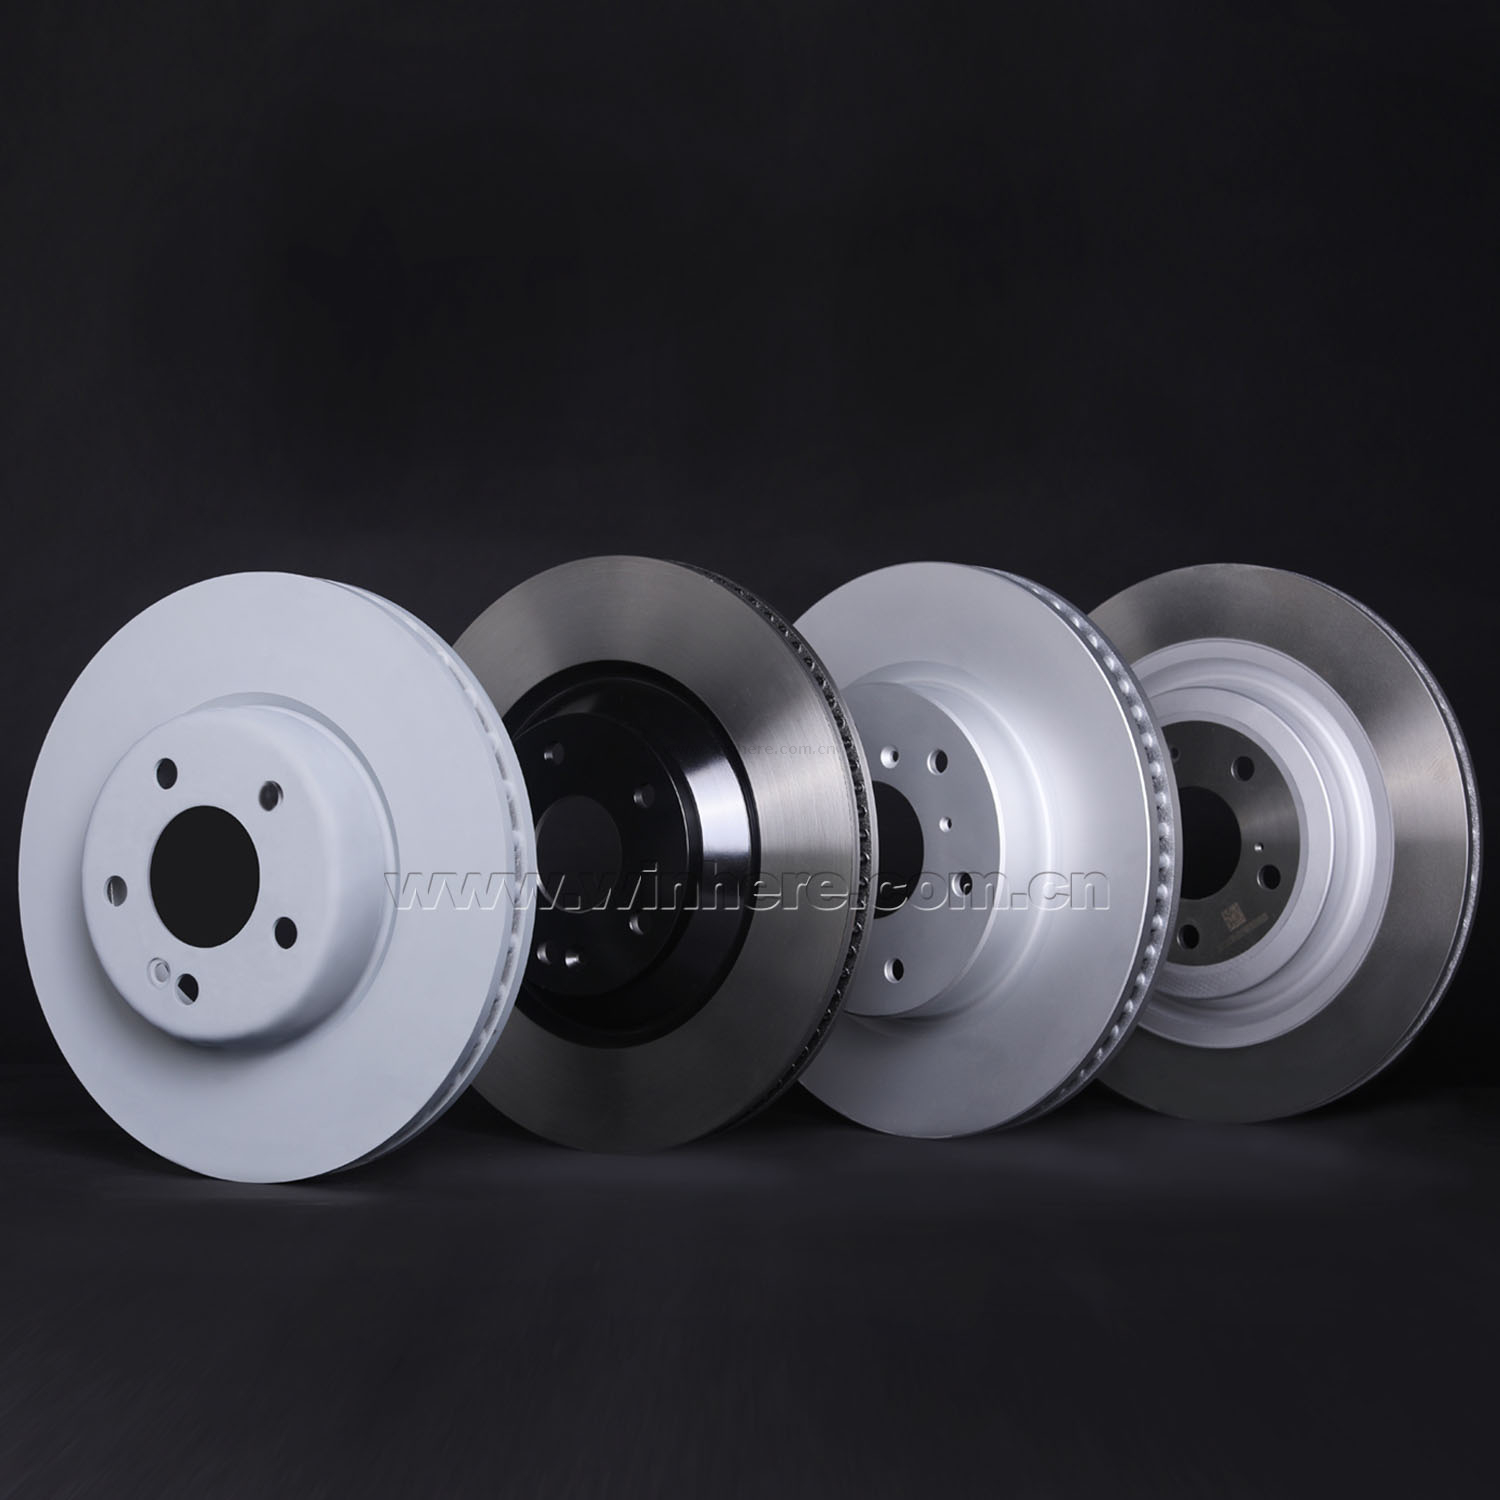 Ford Drilled Coated Brake Discs